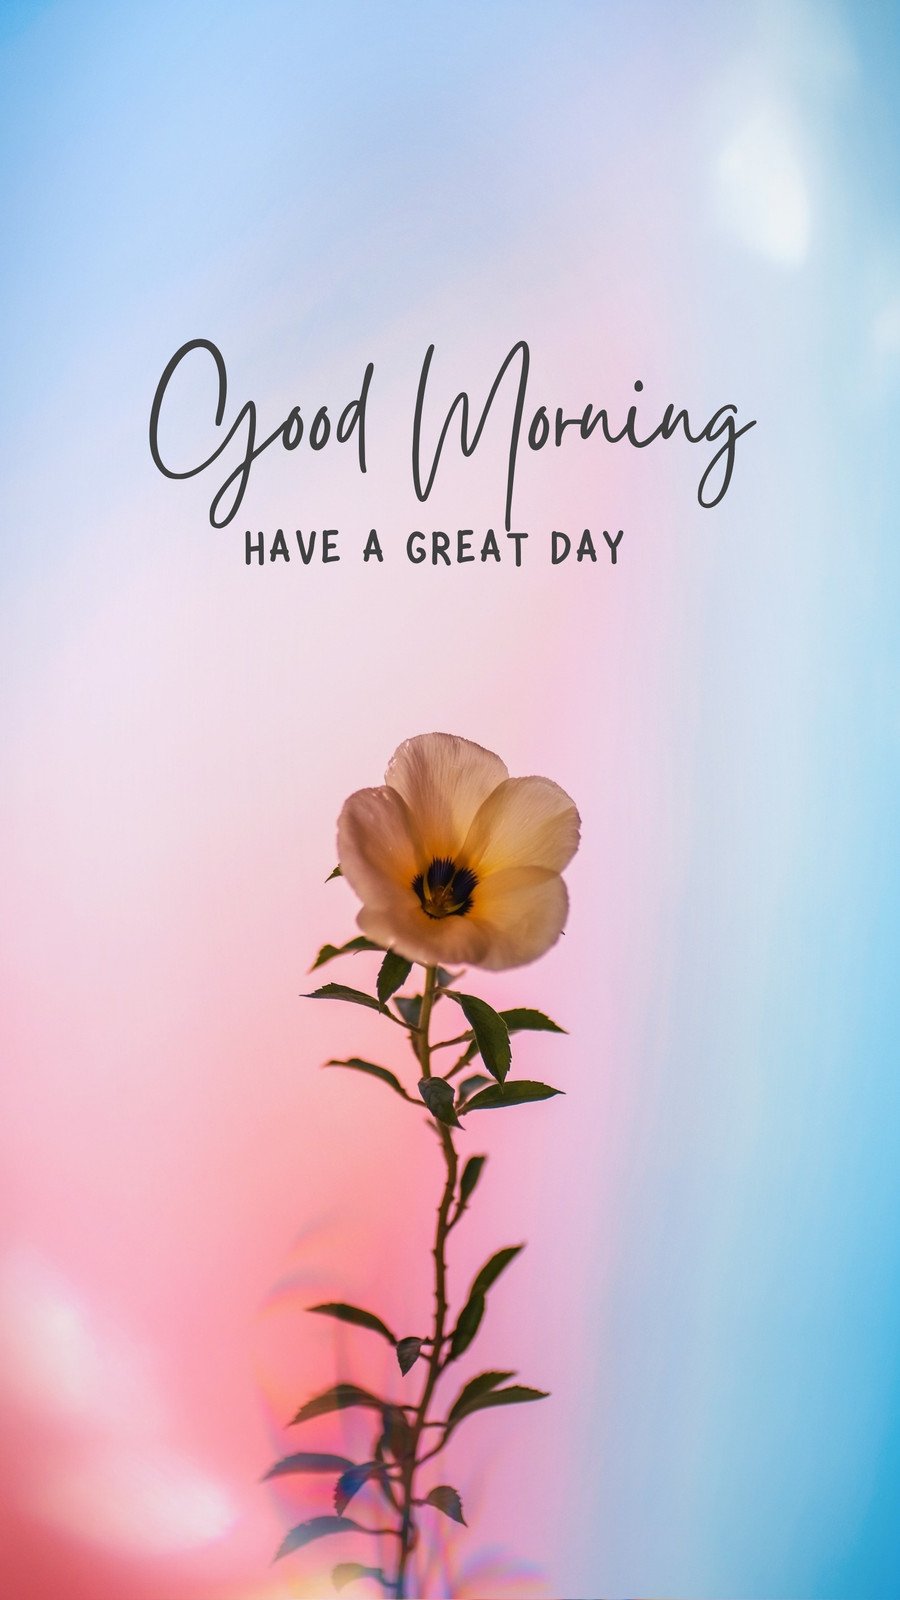 Page 2 - Free and customizable good morning templates